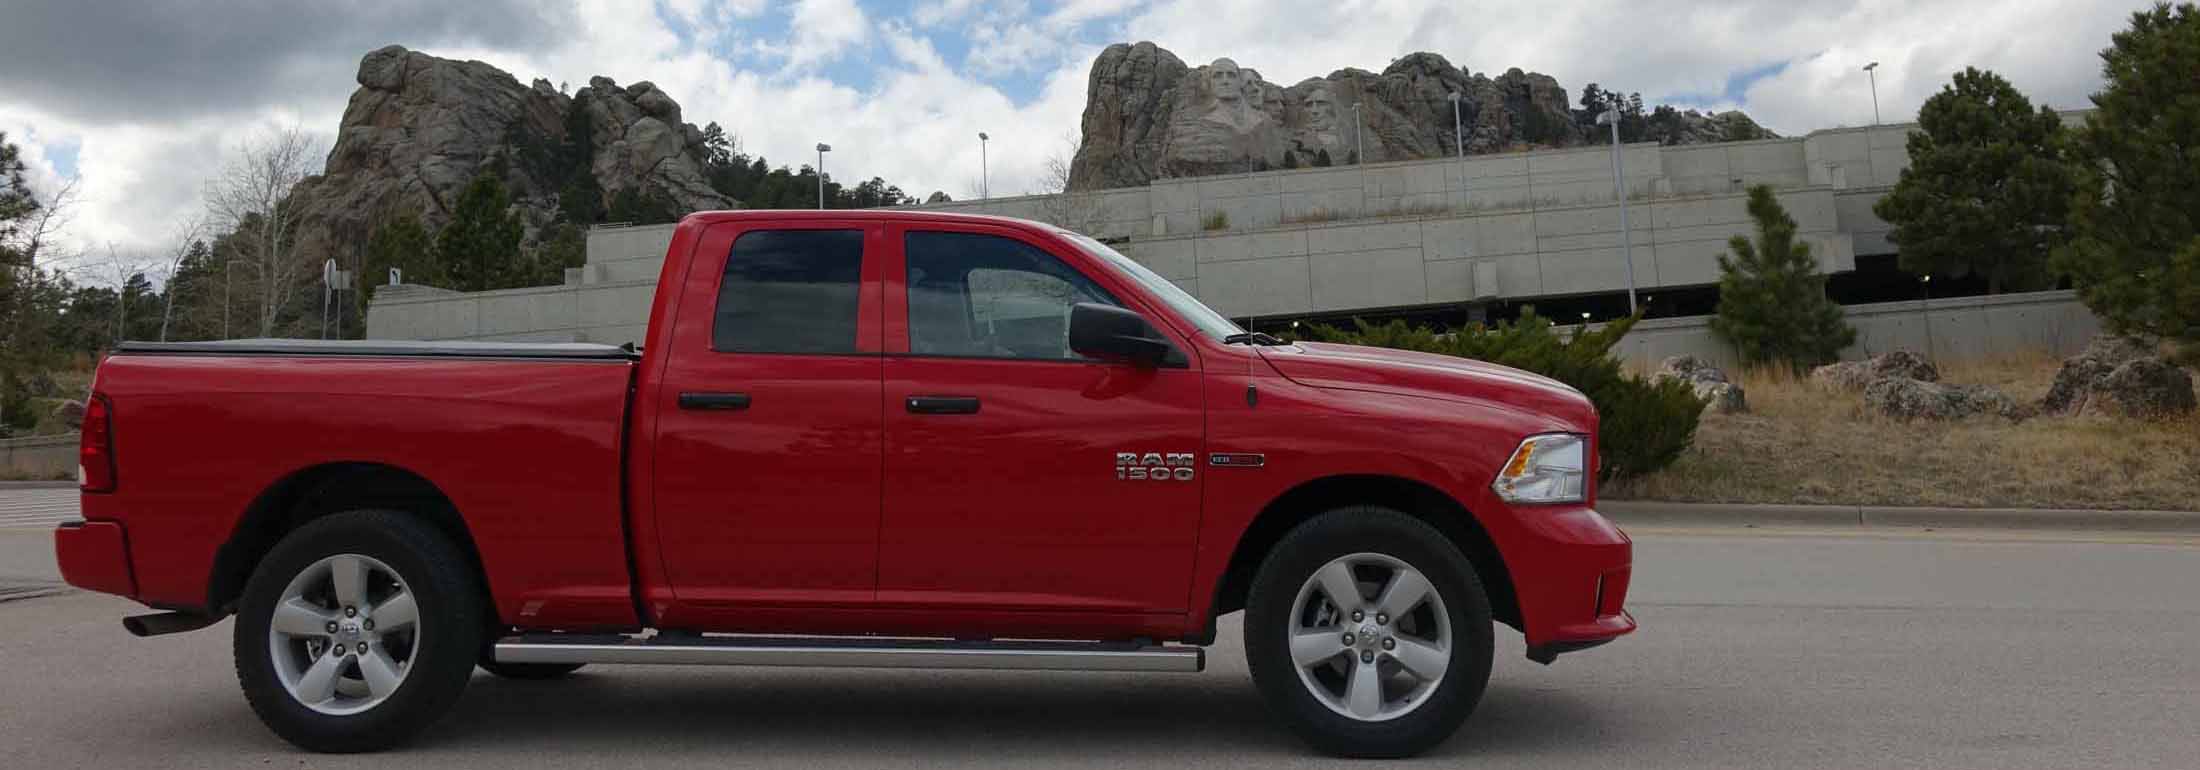 Here's how I averaged 31.5 mpg in a Ram HFE EcoDiesel | Autoblog